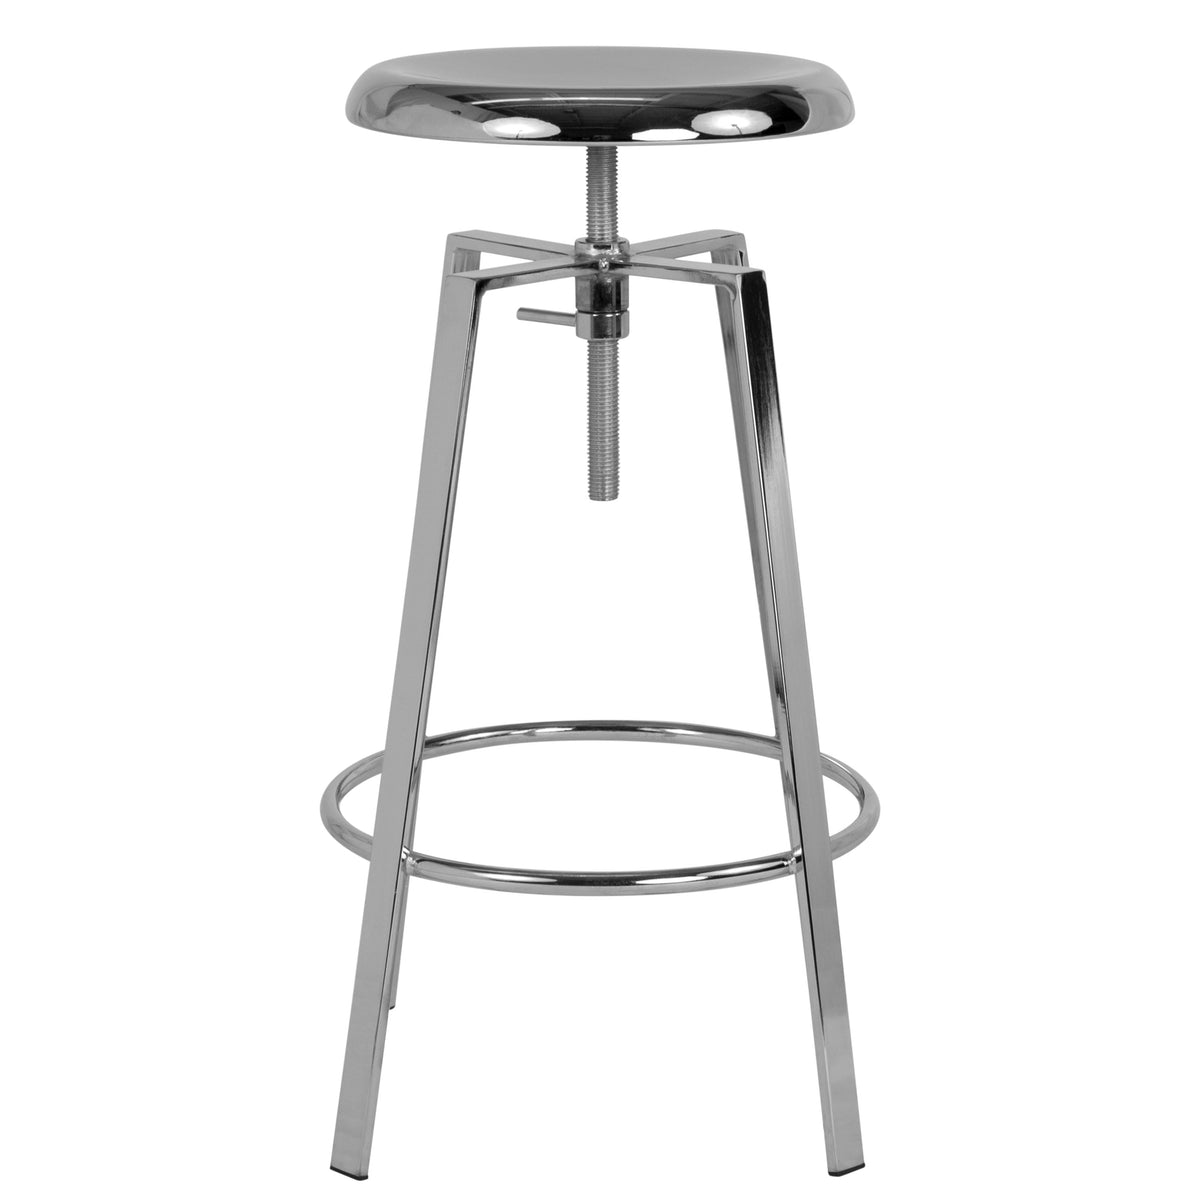 Chrome |#| Industrial Style Barstool w/ Swivel Lift Adjustable Height Seat in Chrome Finish